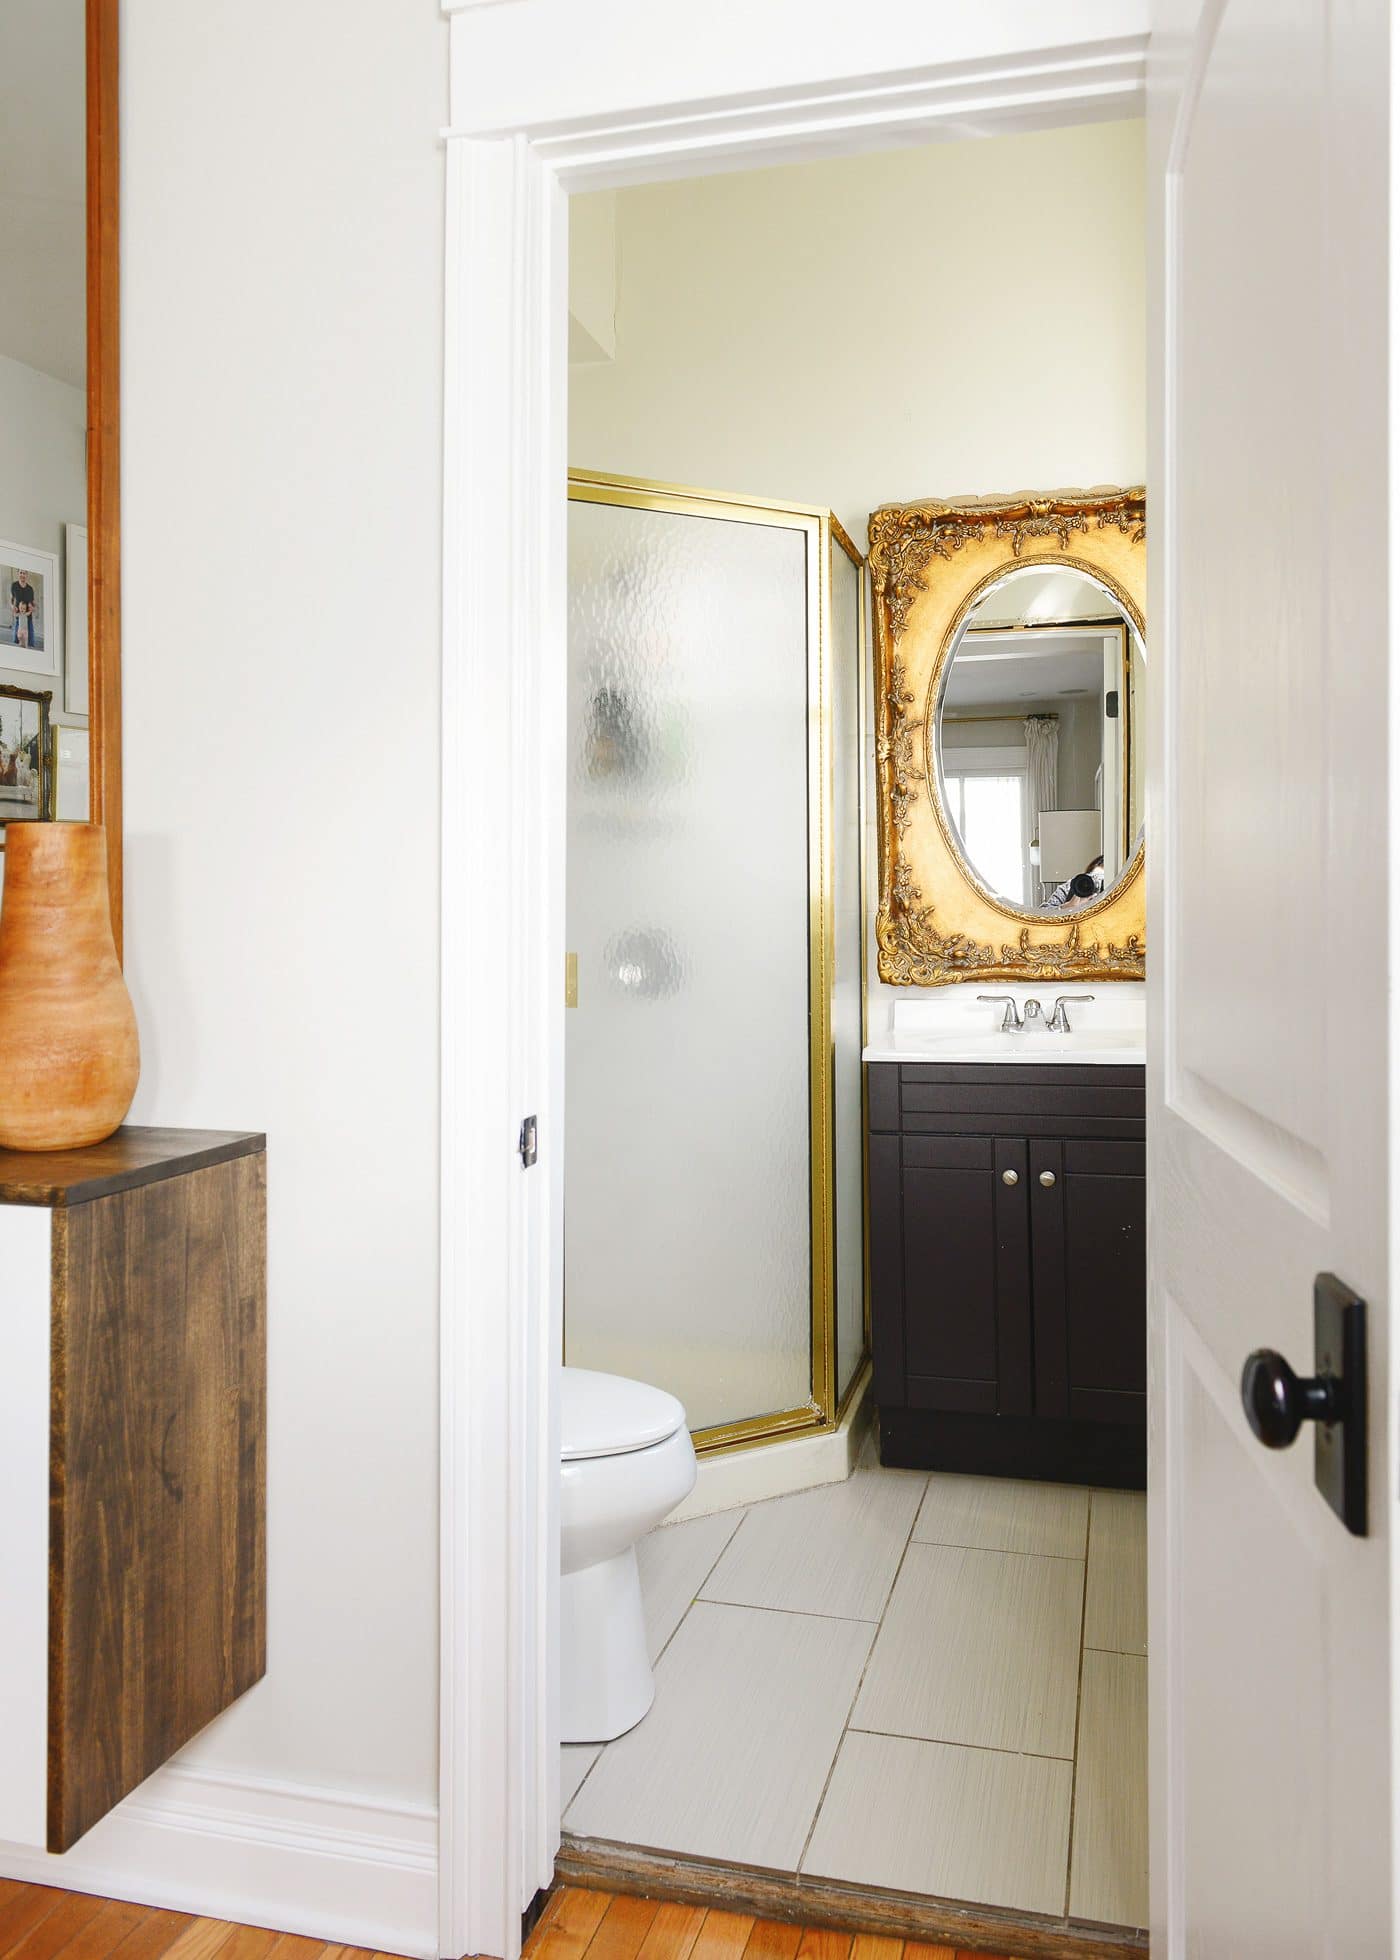 How We'll Be Renovating Our Bathroom to Maximize ROI